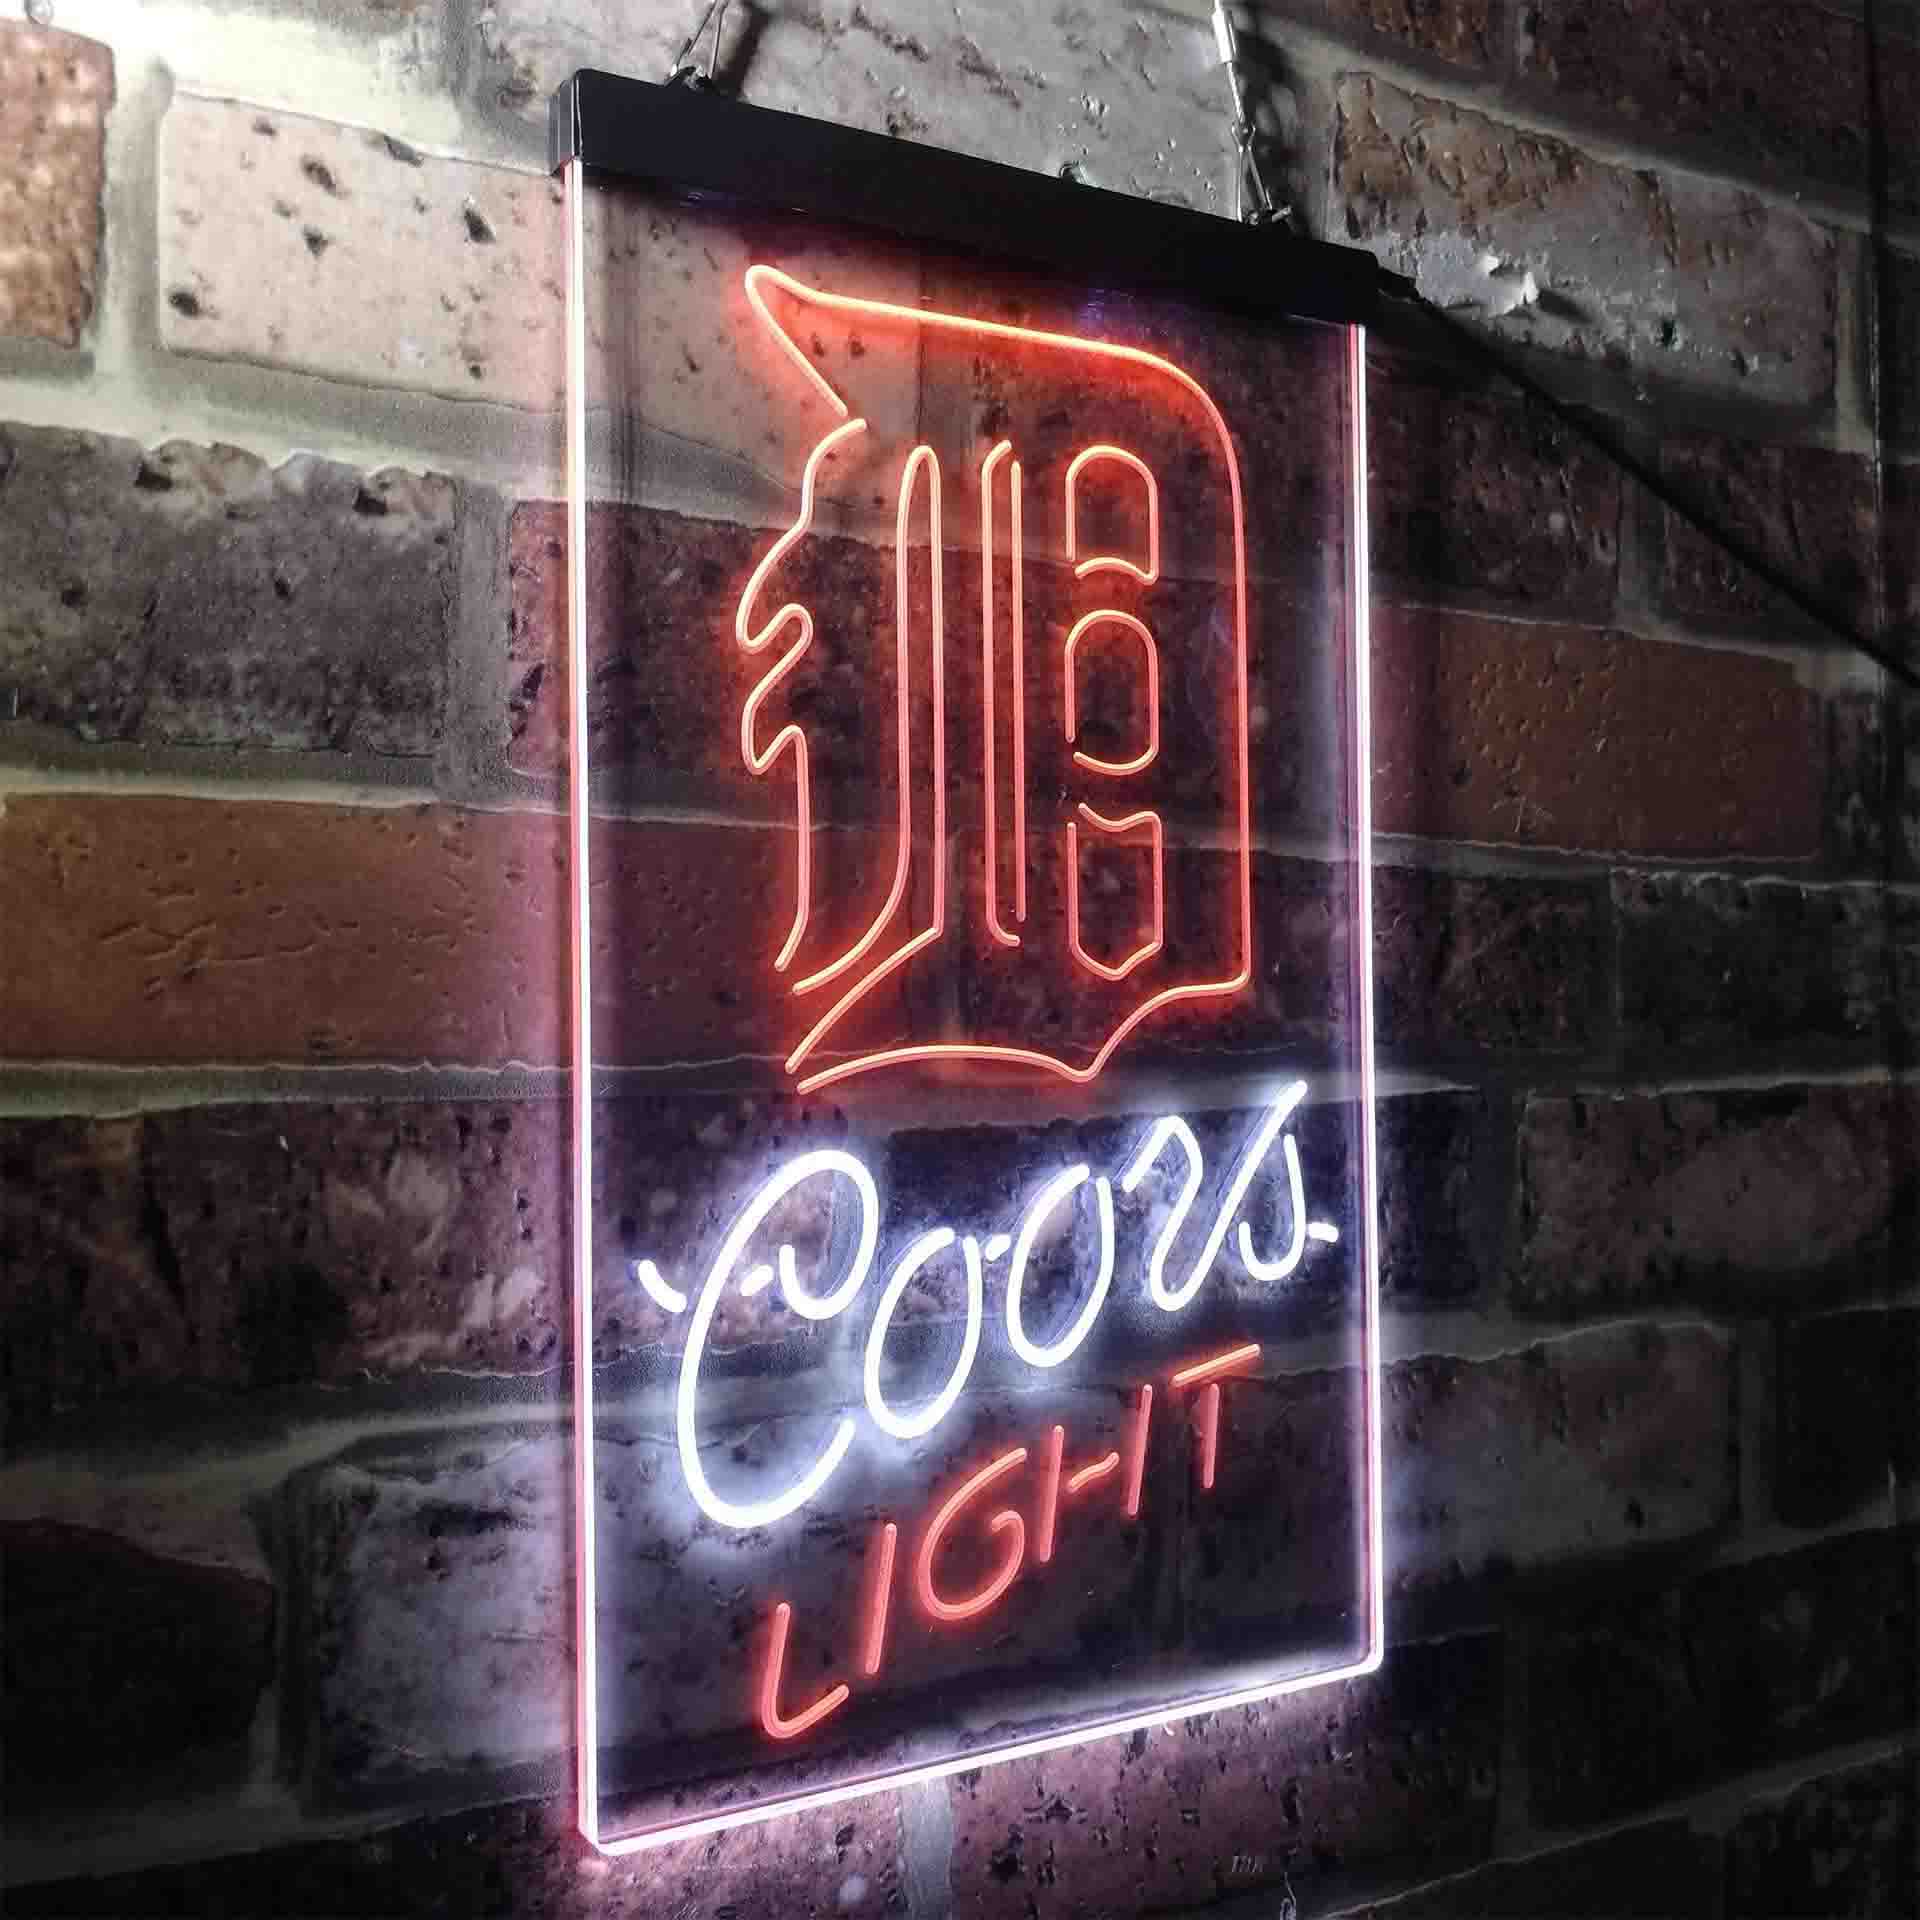 Detroit Tigers Coors Light Neon-Like LED Sign